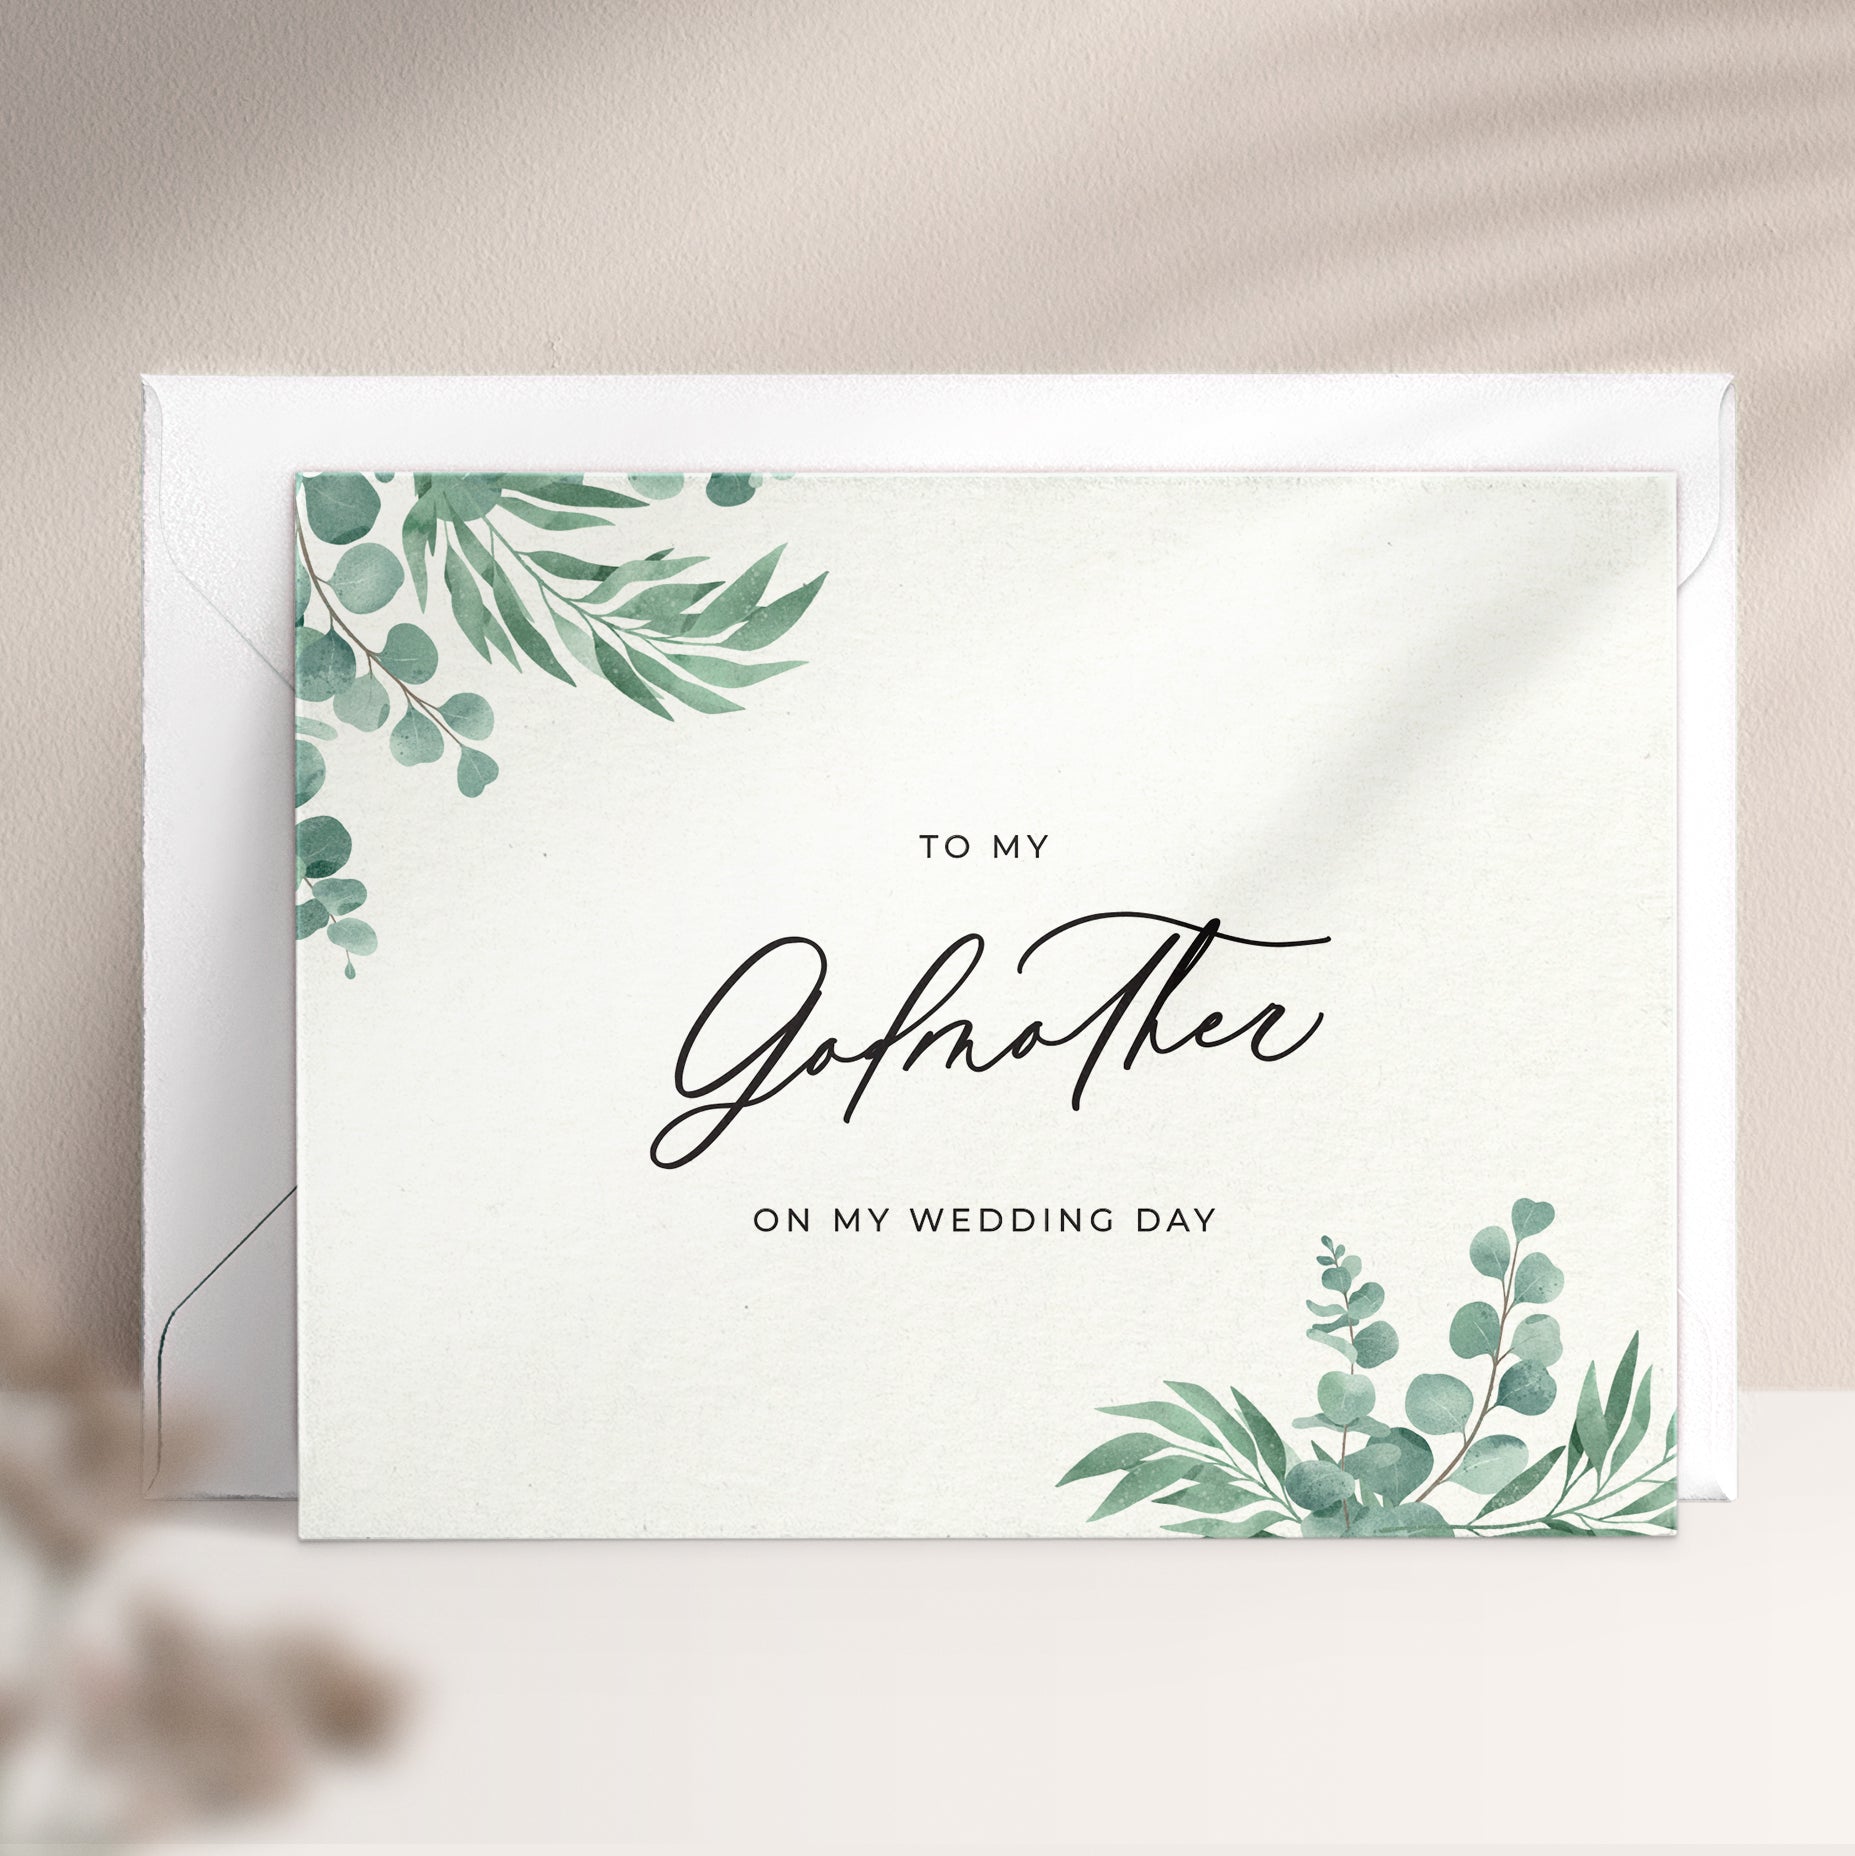 To my godmother on my wedding day note card in greenery design with eucalyptus leaves and calligraphy font from XOXOKristen.